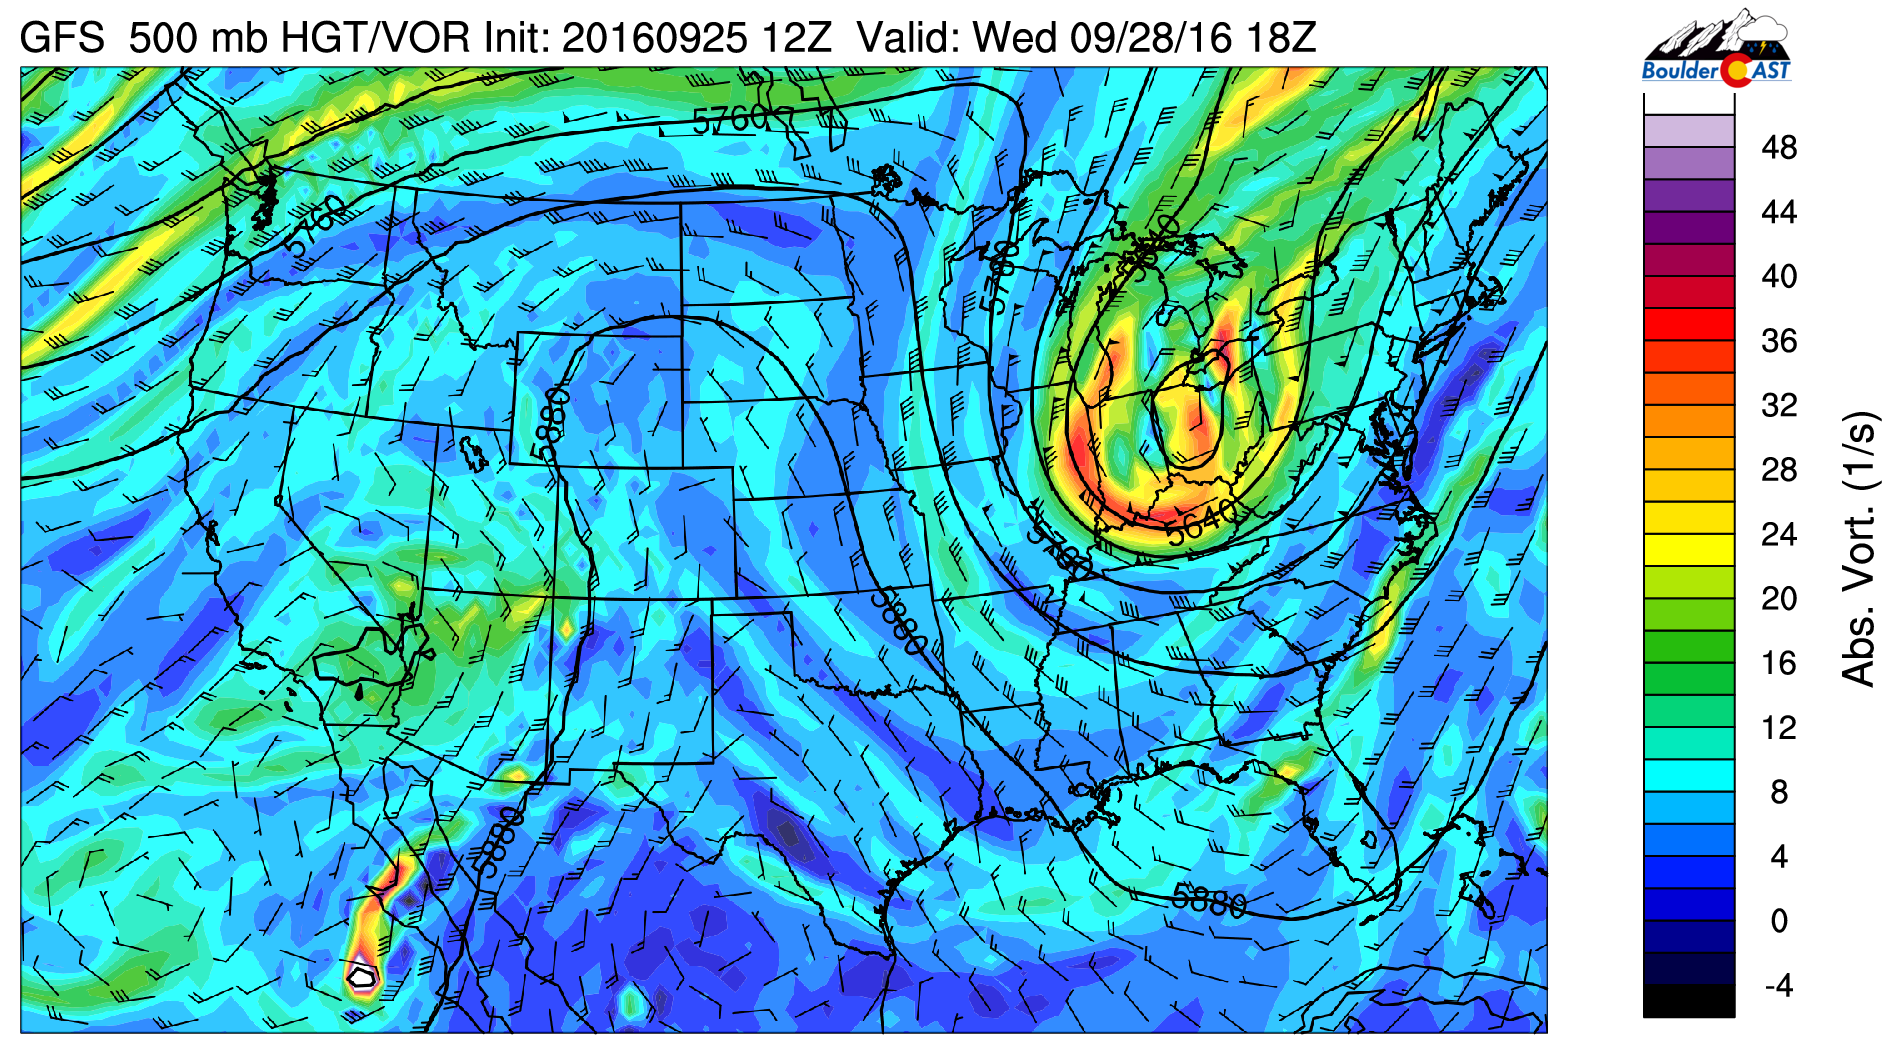 GFS 500 mb vorticity and wind field for Wednesday